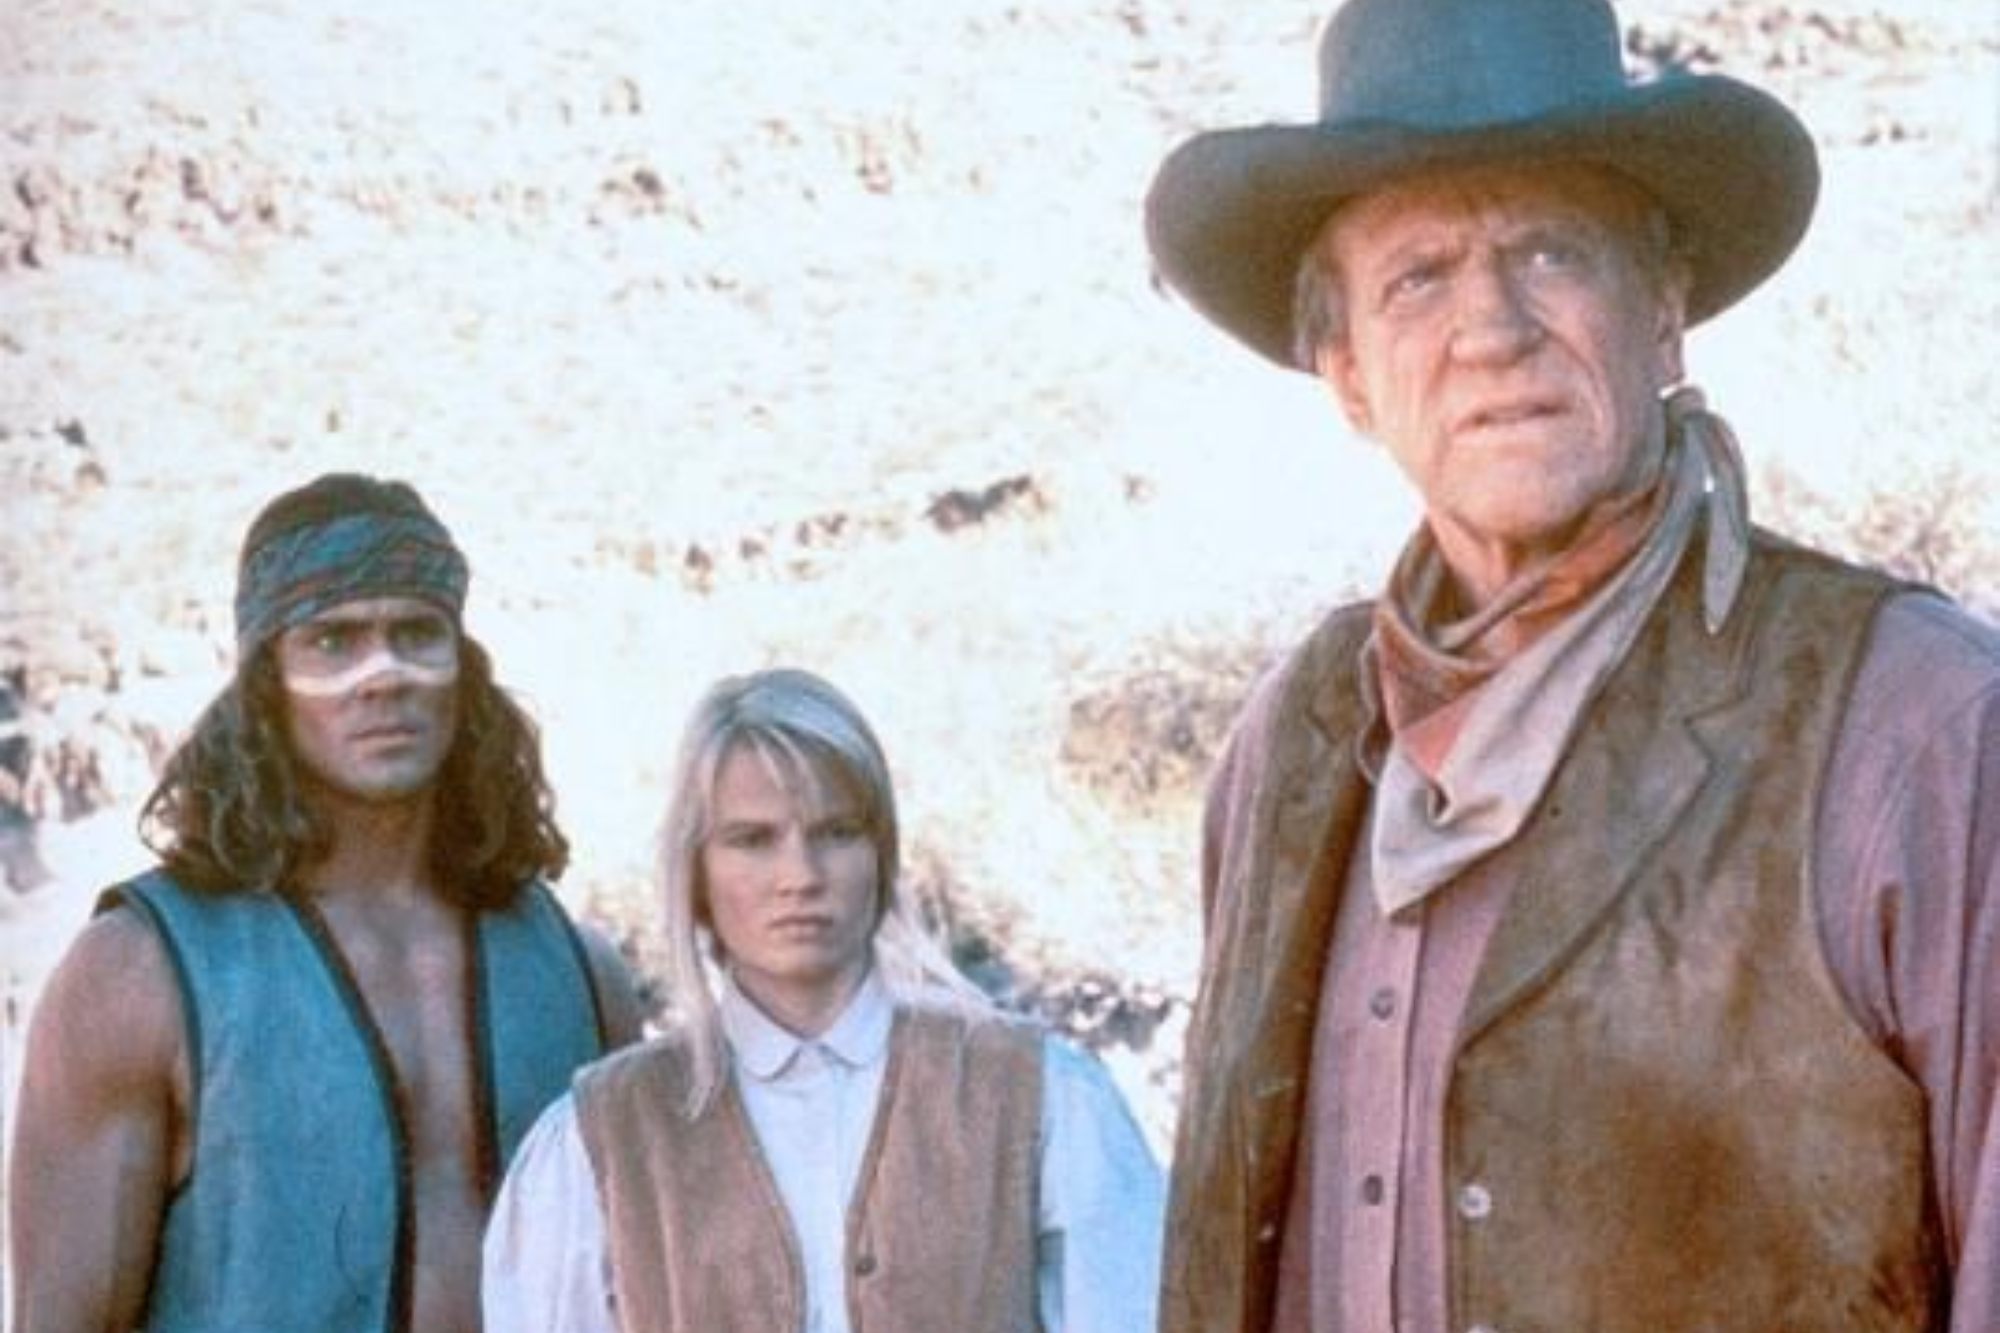 'Gunsmoke: The Last Apache' Joe Lara as Wolf, Amy Stoch as Beth Yardner, James Arness as Matt Dillon looking to the side while wearing Western costumes.